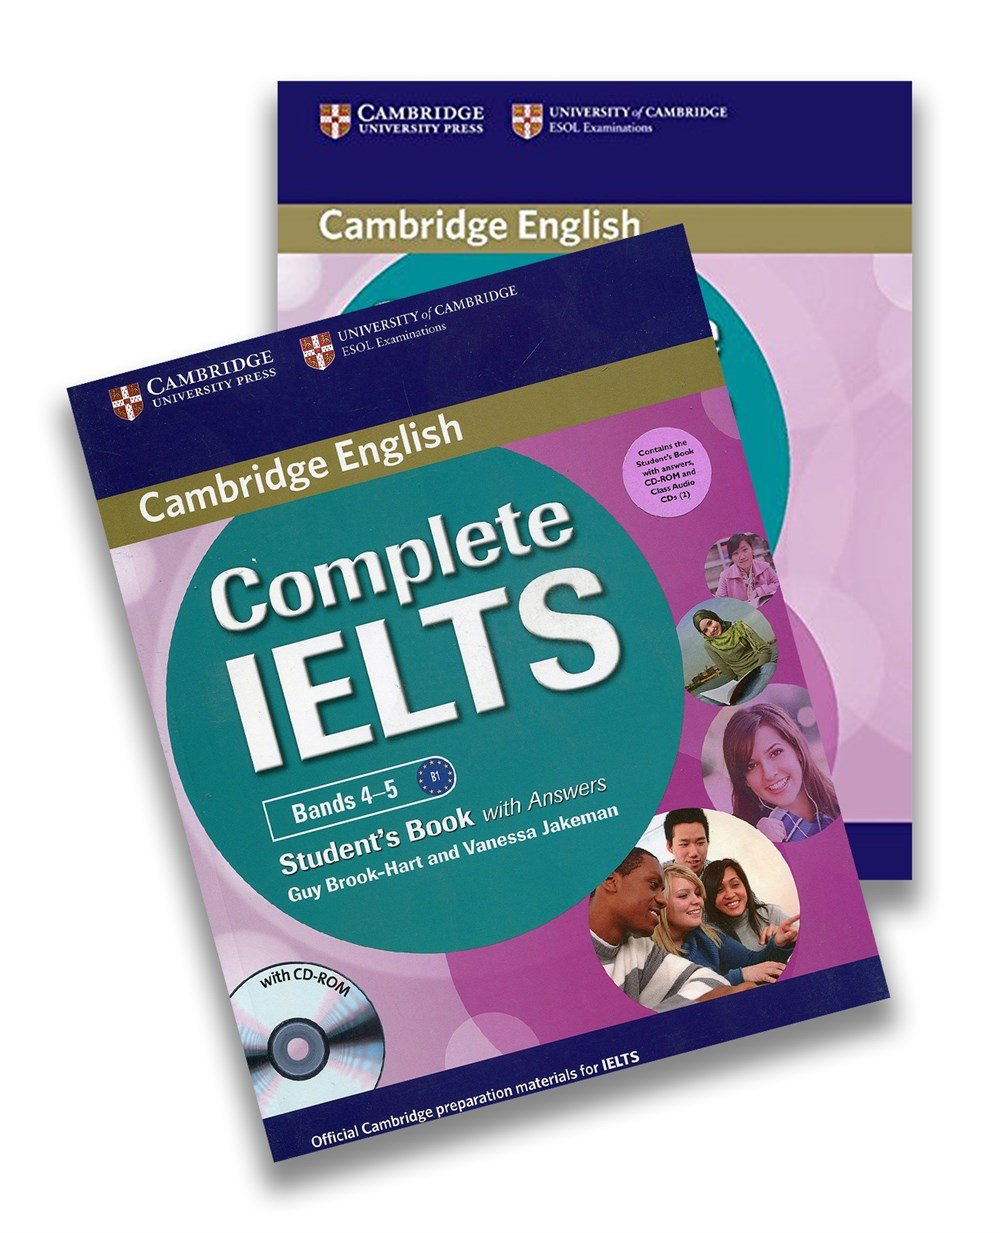 Complete IELTS Bands 4-5 Student's Book, Workbook and CD